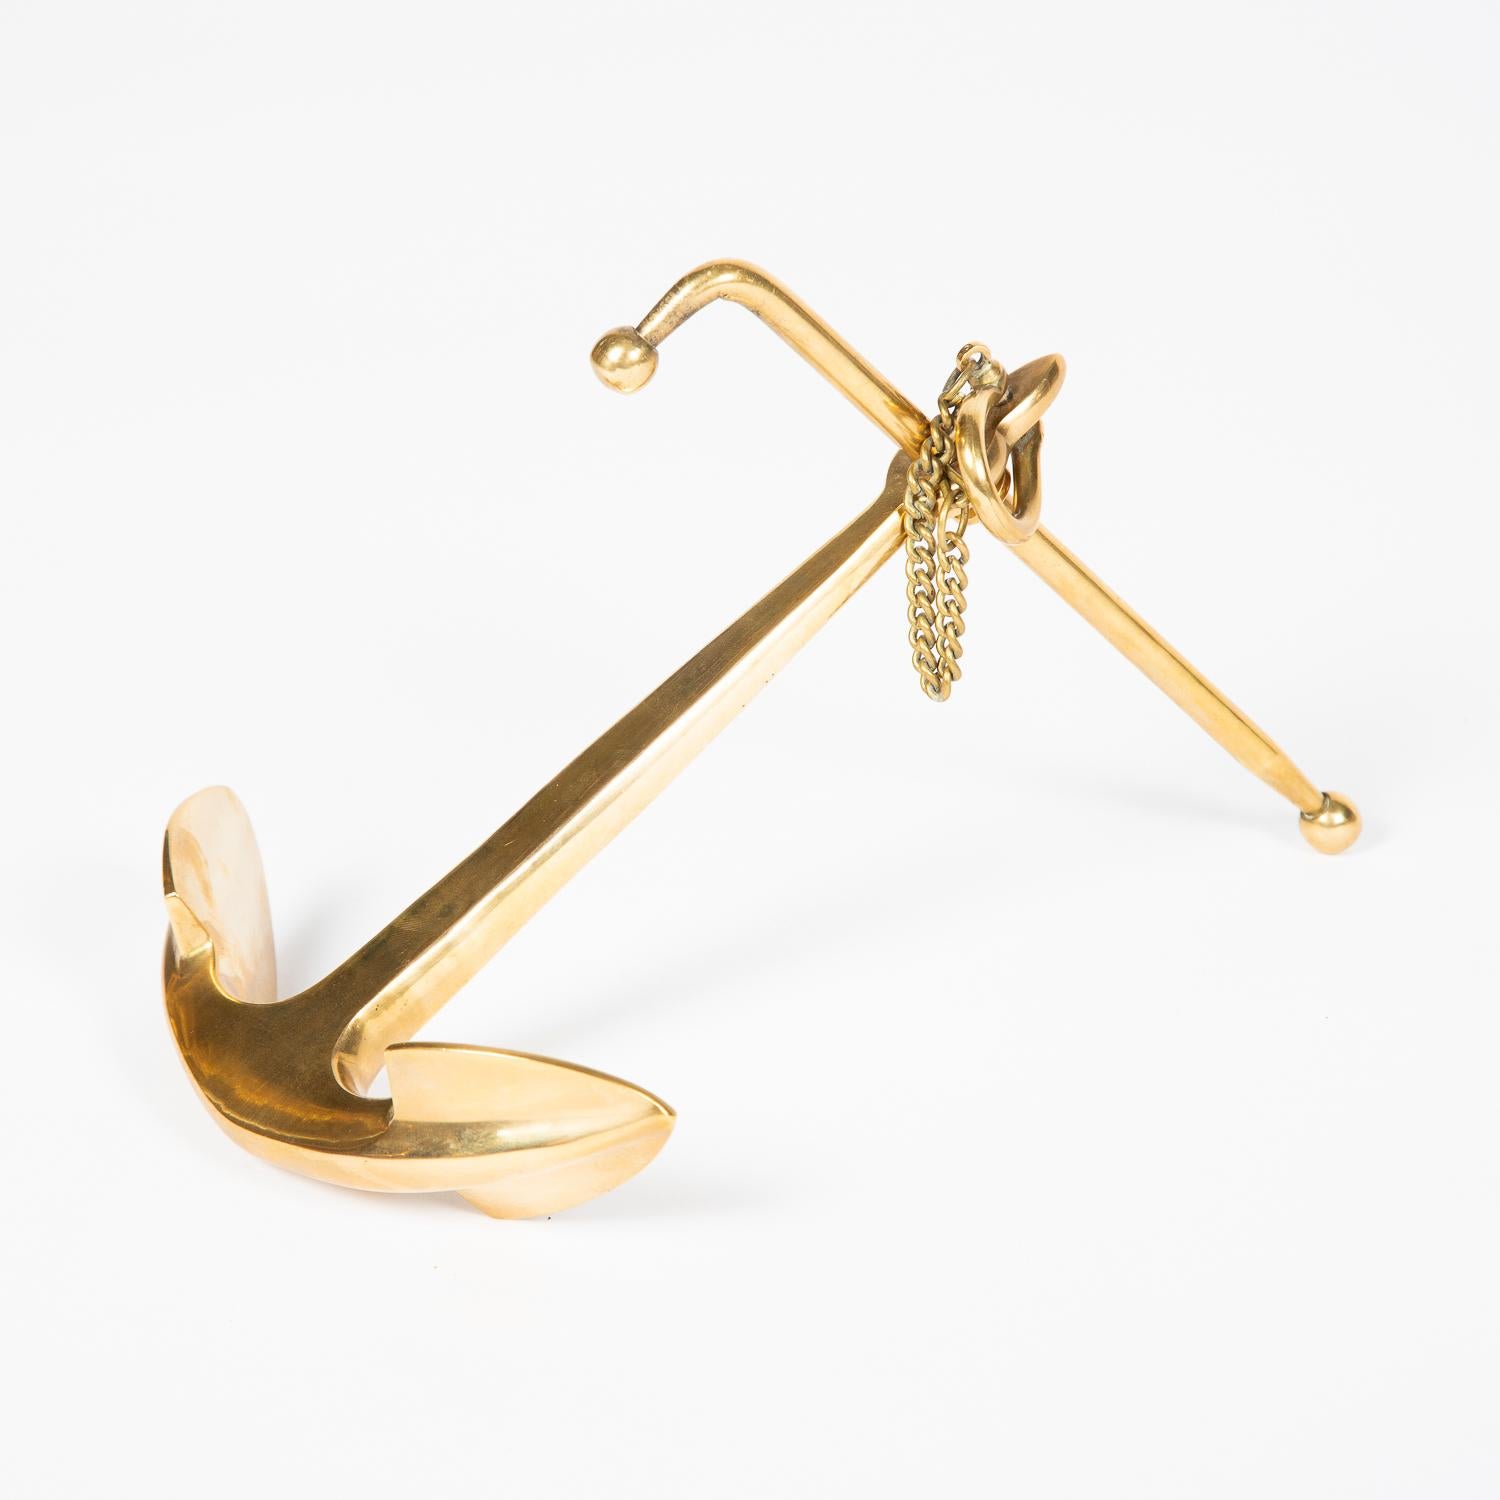 A brass desk top model of a Kedge admiralty anchor.

Well modeled with Shank, stock, crown, flukes, shackle and keep pin.

 